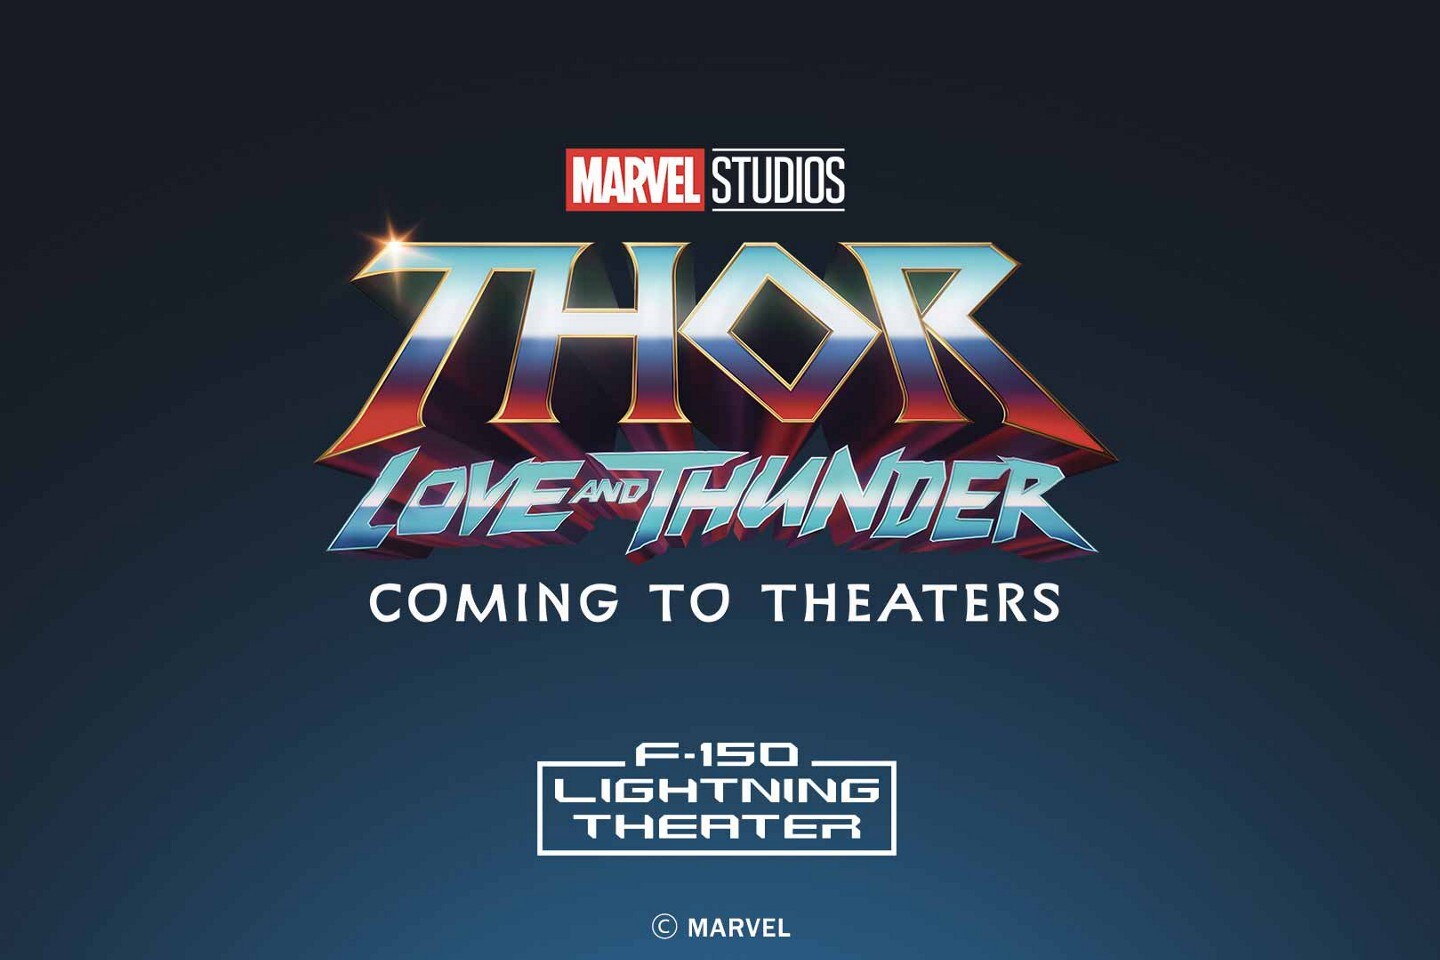 The Thor: Love and Thunder logo with the F-150® Lightning Theater logo below it